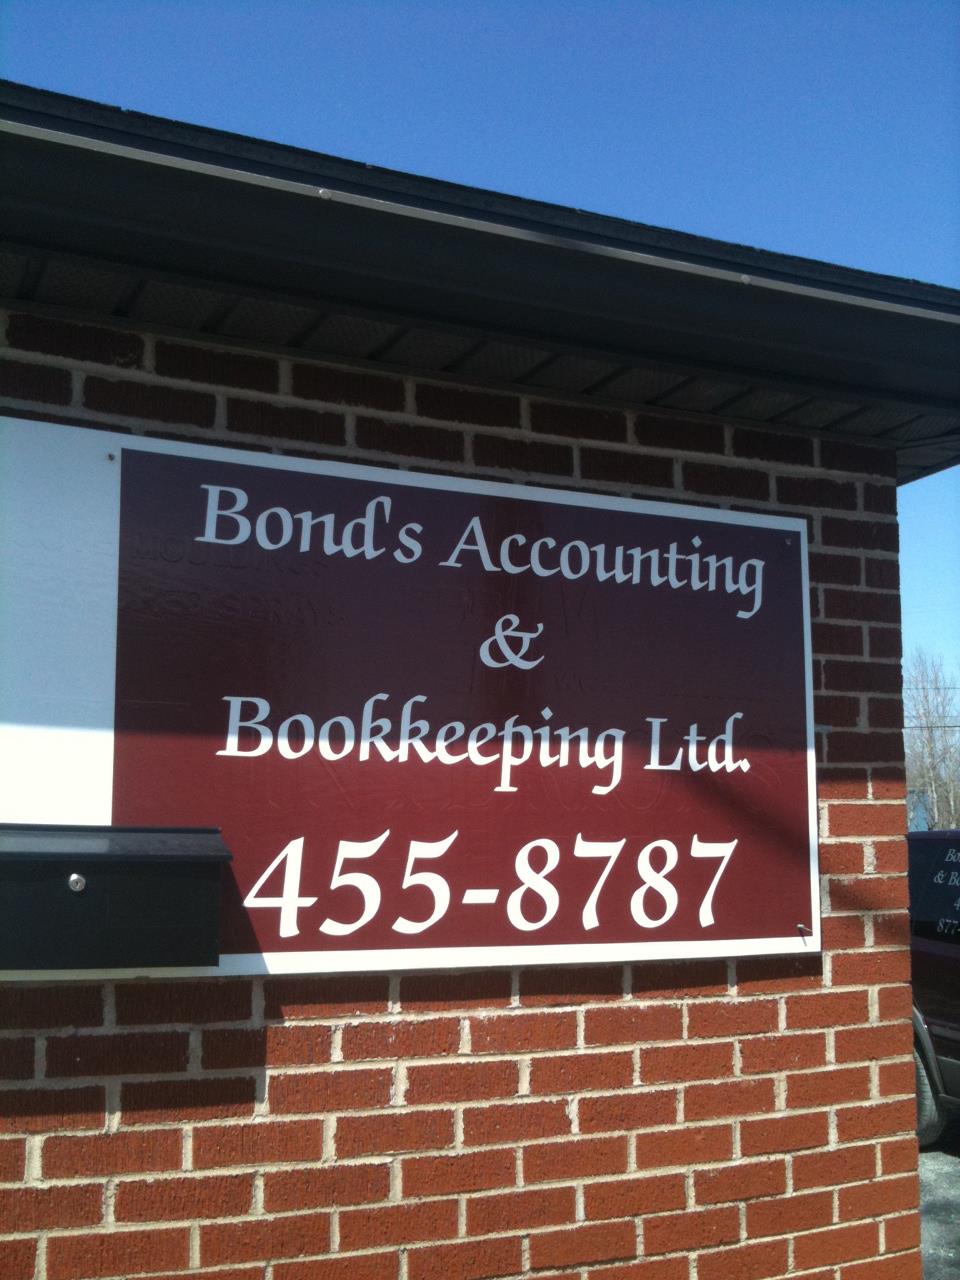 Bond's Accounting & Bookkeeping